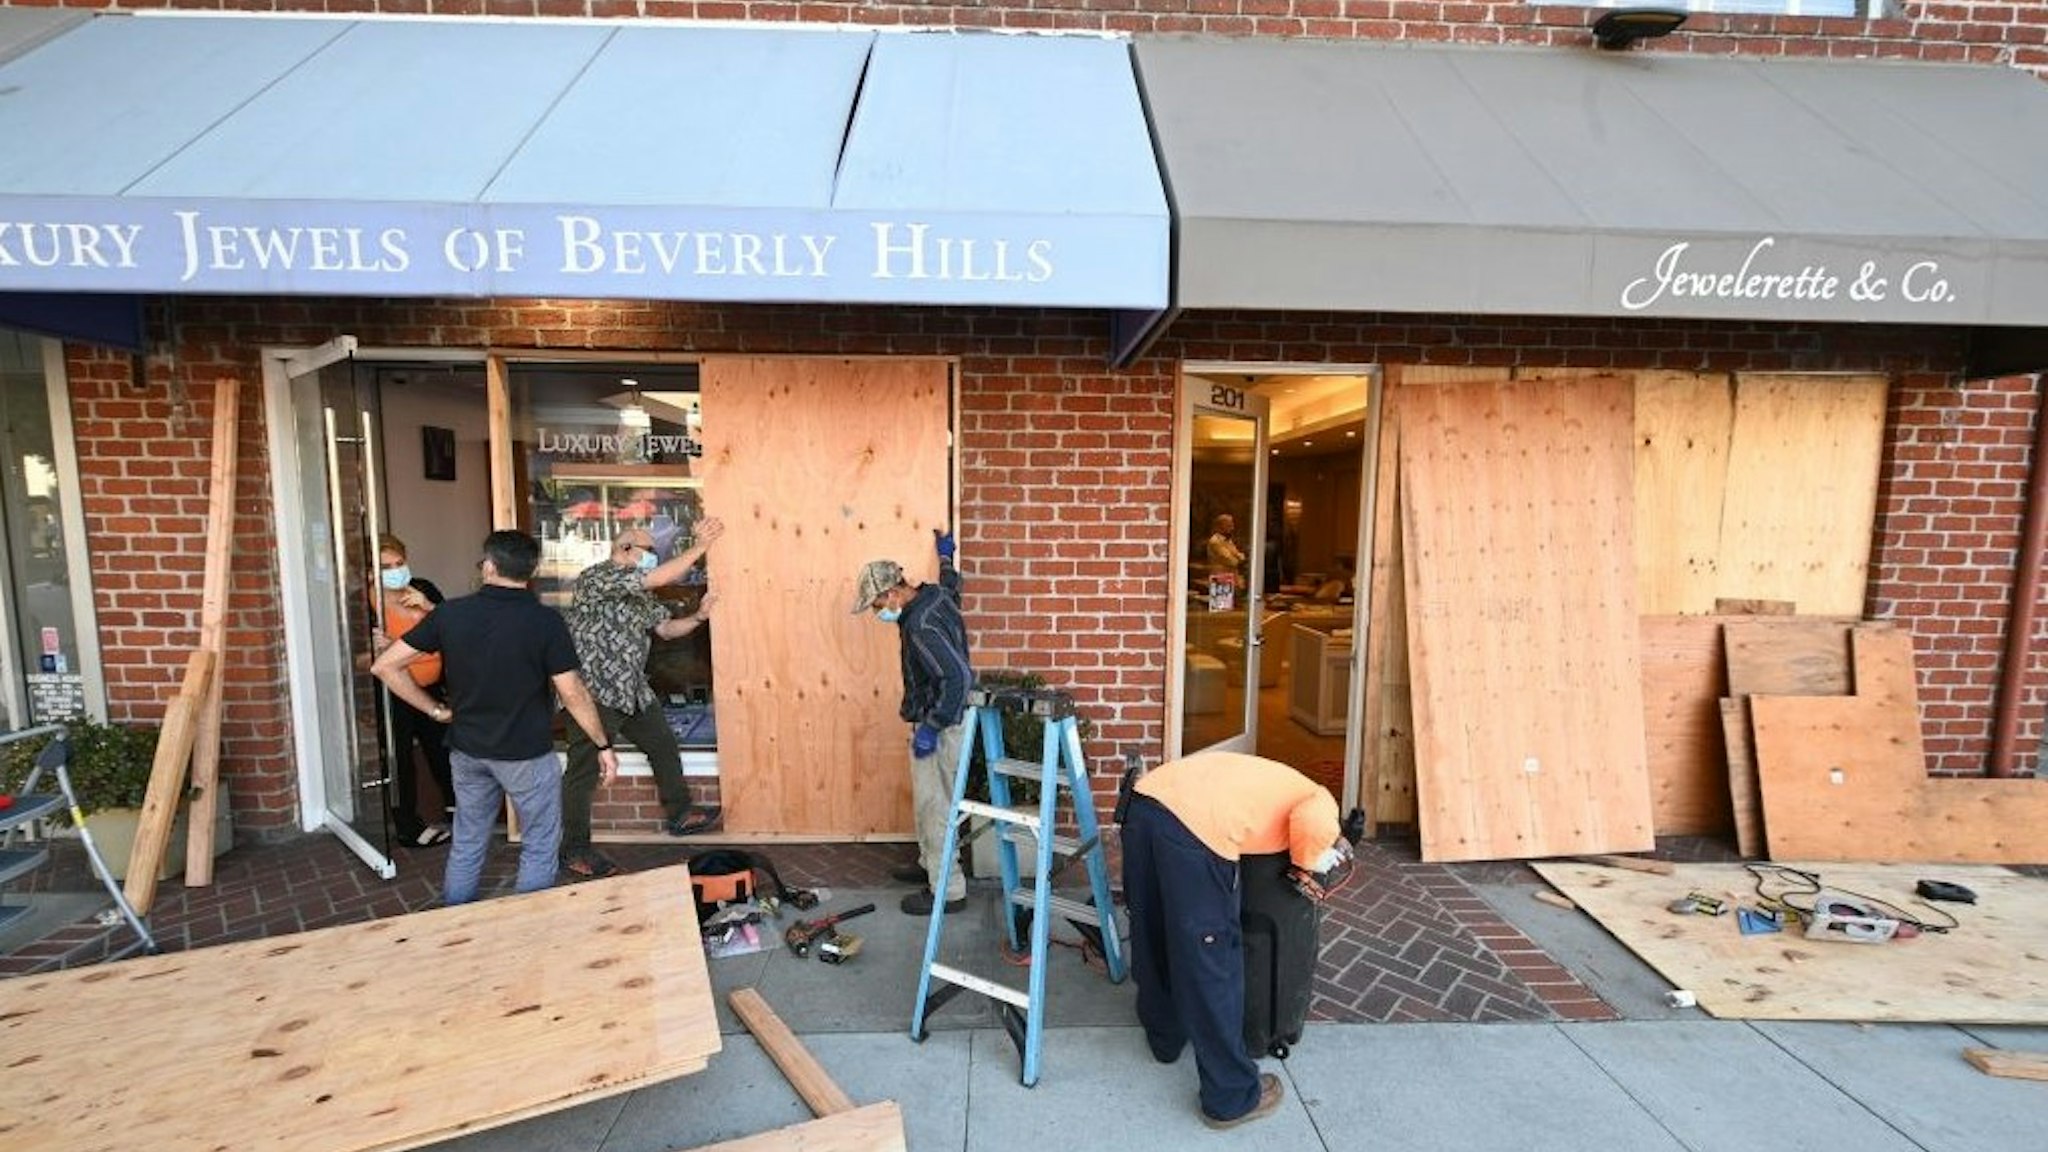 A jewelry store in Beverly Hills is being boarded up in anticipation of violence as a result of the upcoming U.S. presidential election, October 30, 2020 in Beverly Hills, California. - Amid one of the most contentious presidential elections in recent memory, business owners in the world-renowned high-end shopping area were encouraged to protect their businesses from possible protests or violence. (Photo by Robyn Beck / AFP) (Photo by